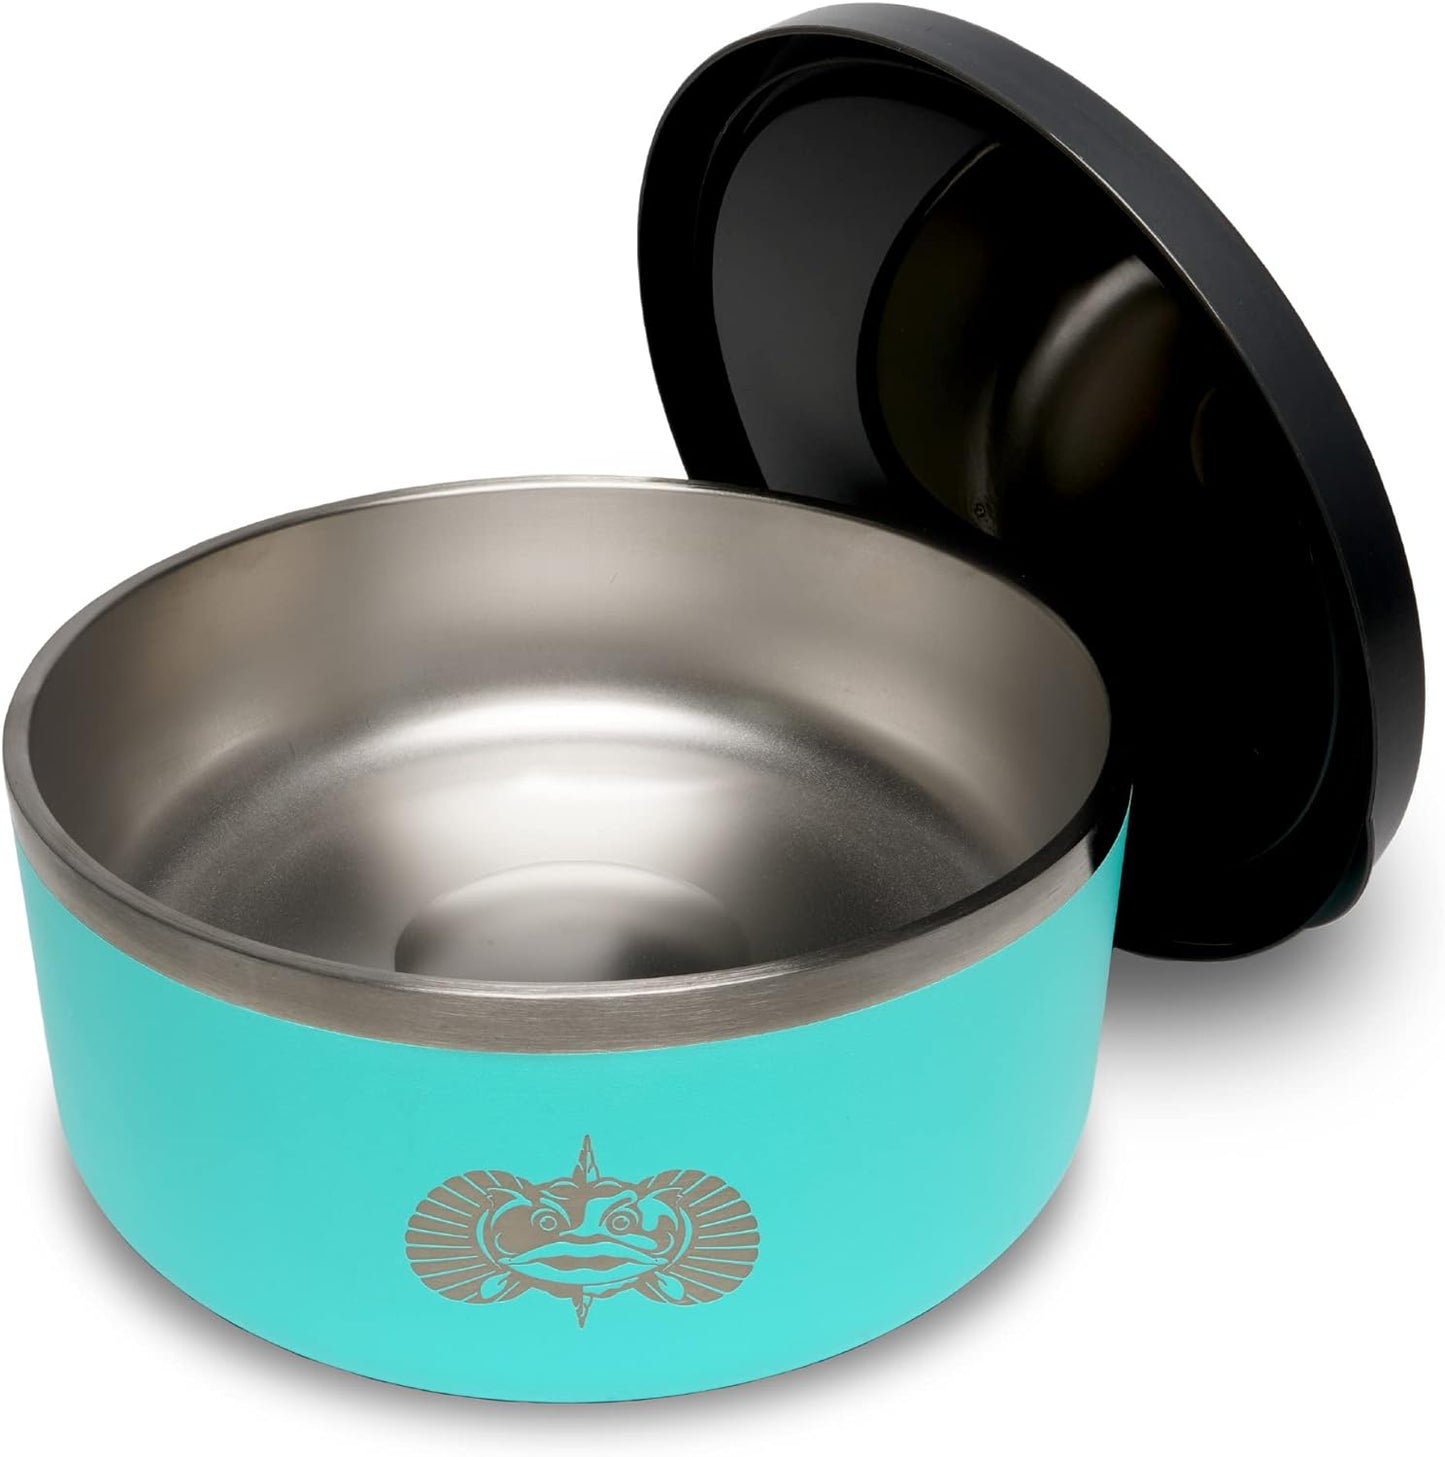 Toadfish Non-Tipping Dog Bowl - Double-Walled Stainless Steel Insulated - Smart-Grip Technology - Includes Cover - Pet Food & Water Dish - Teal